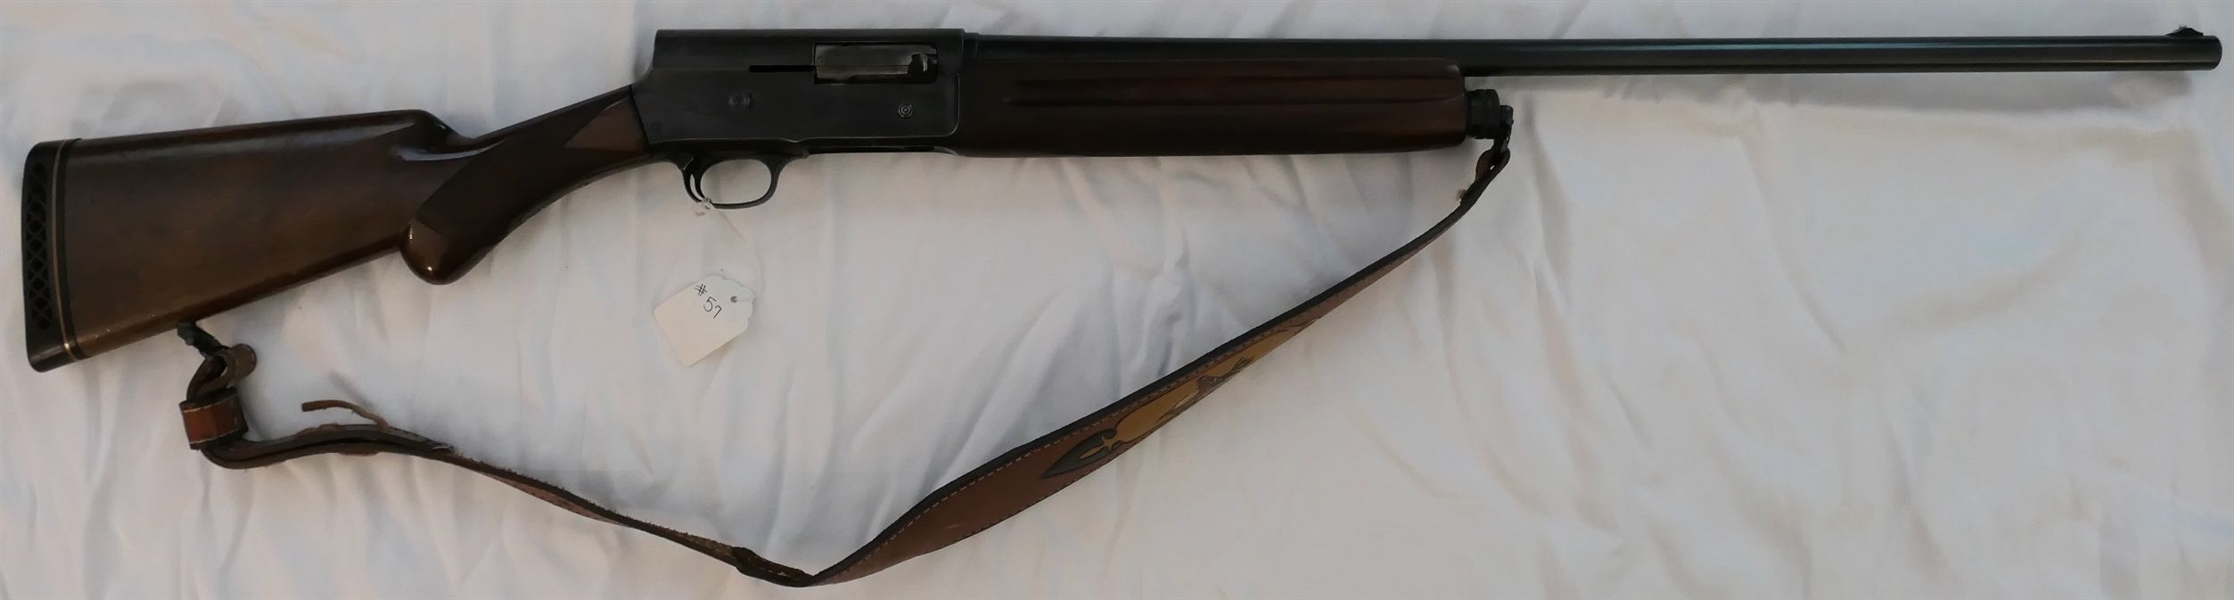 Browning 16 Gauge Auto. Shotgun - Made in Belgium - 2 3/4 Shell - With Embossed Leather Strap with Deer Head